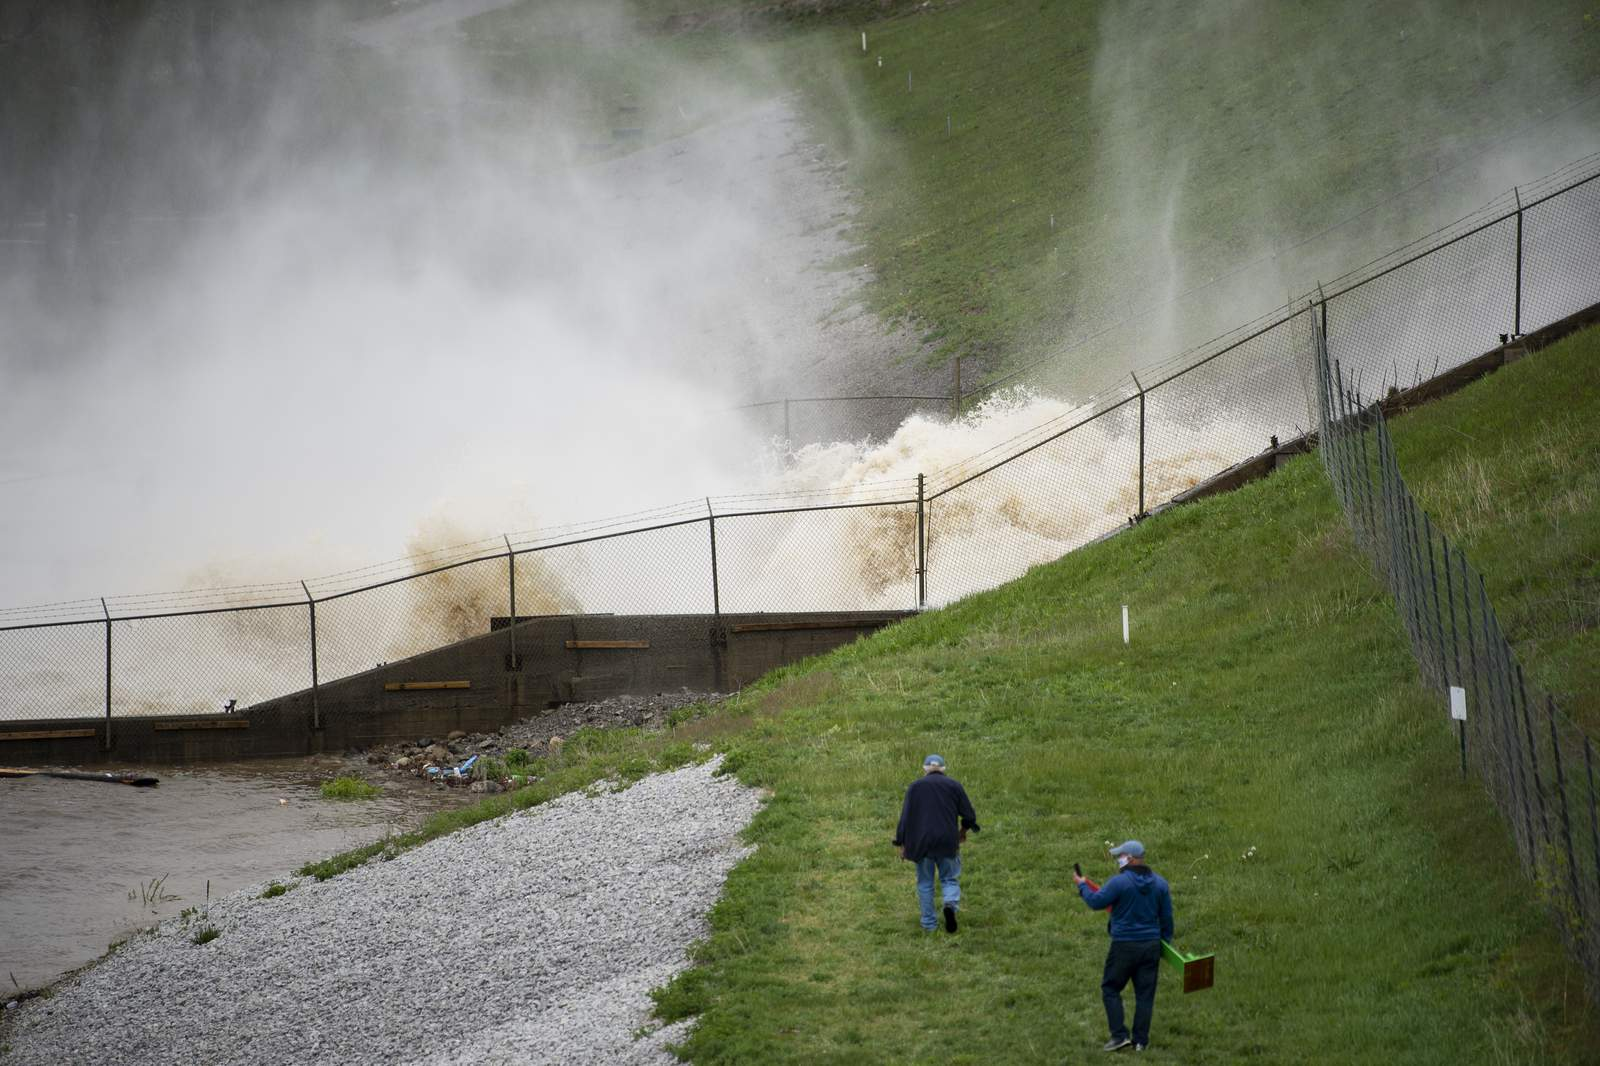 edenville dam breaks in michigan us seems to face consecutive disasters amid worst coronavirus pandemic